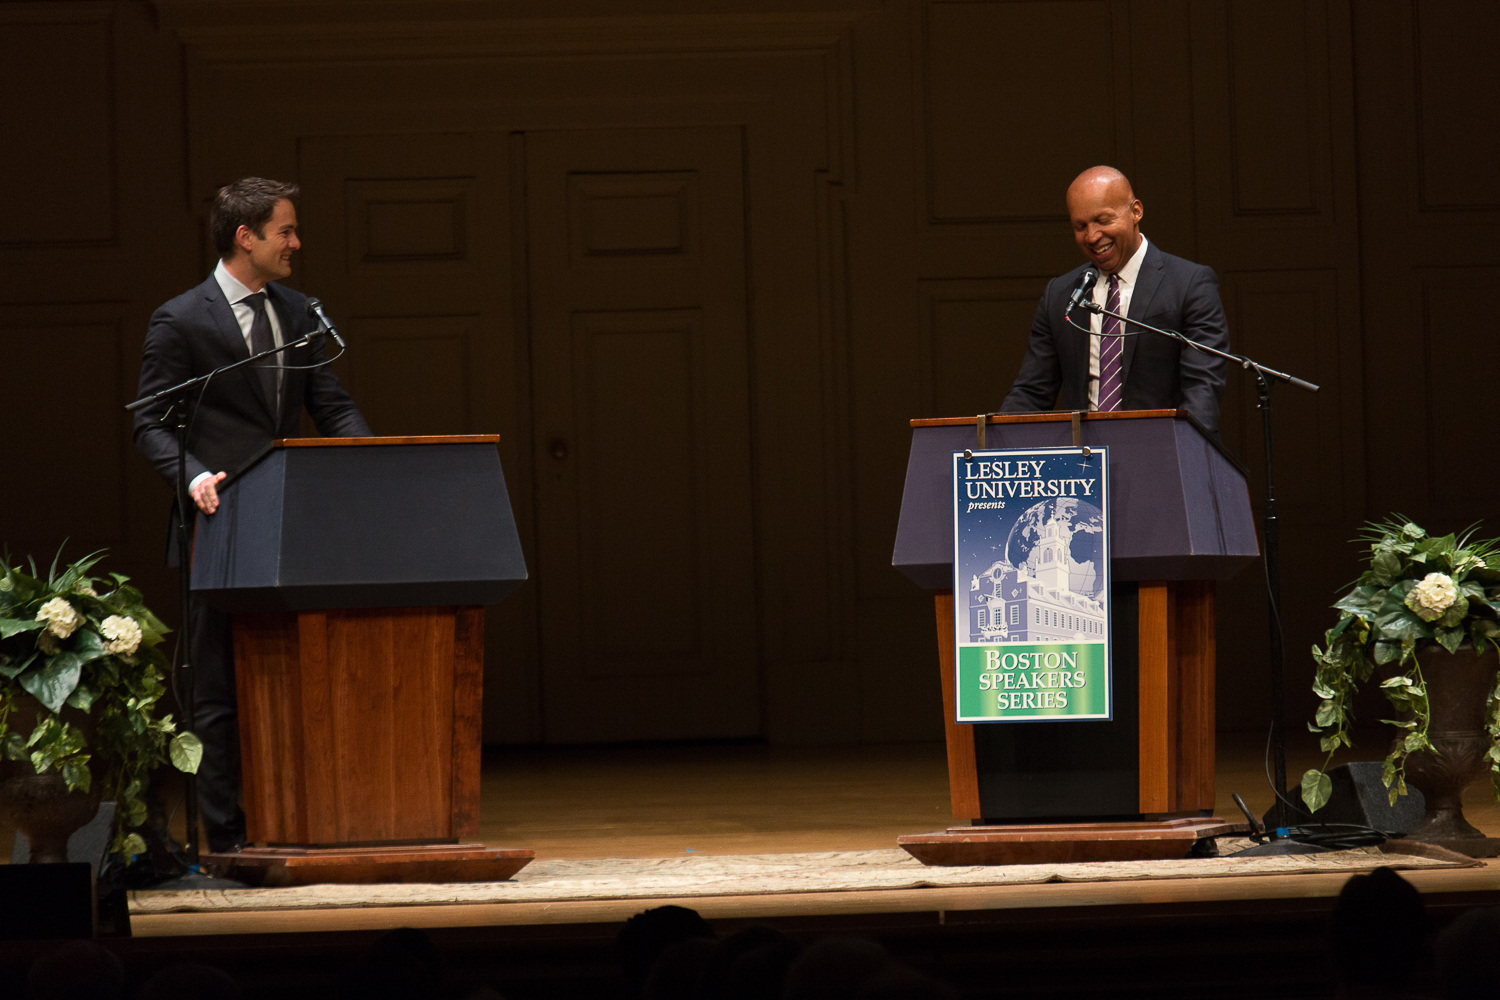 Jared Bowen and Bryan Stevenson on stage together, both behind podiums